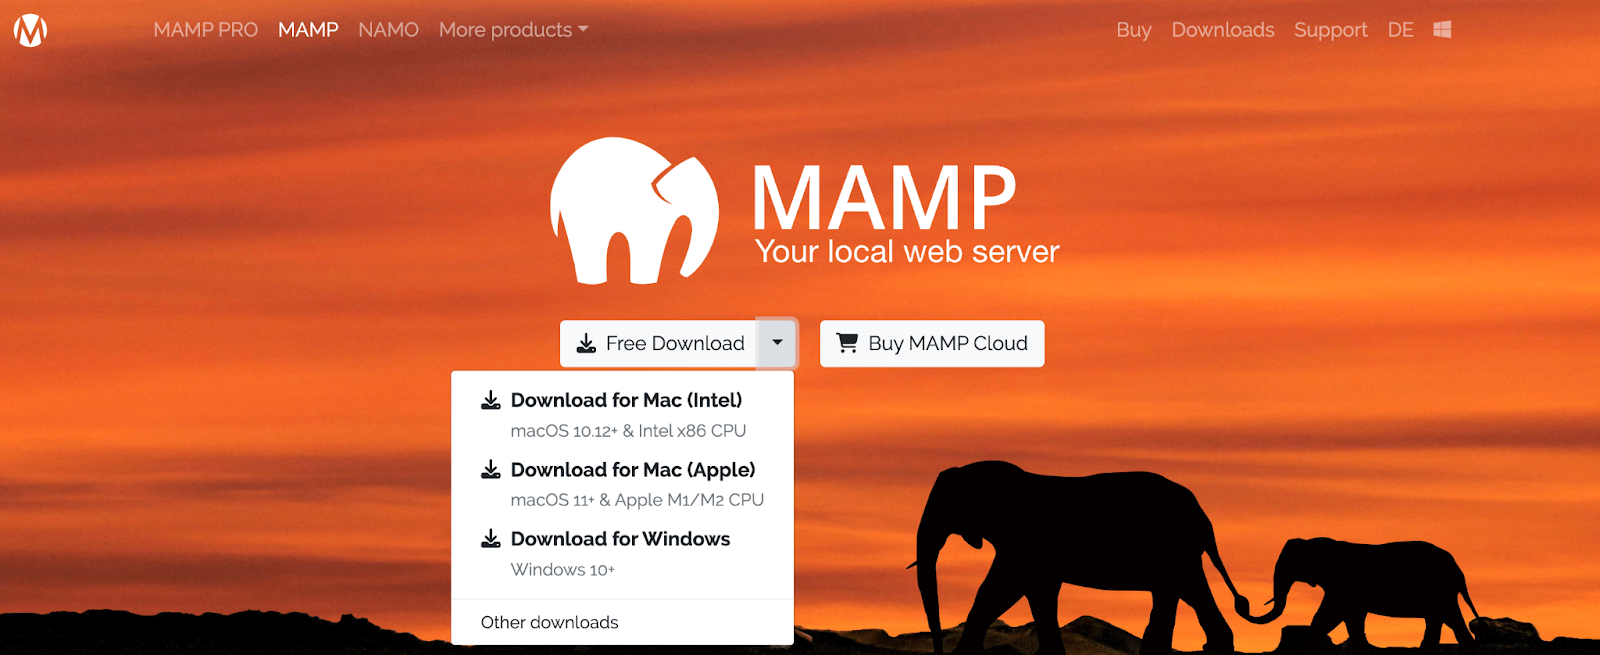 Simply navigate to the MAMP website and click on the Free Download button.